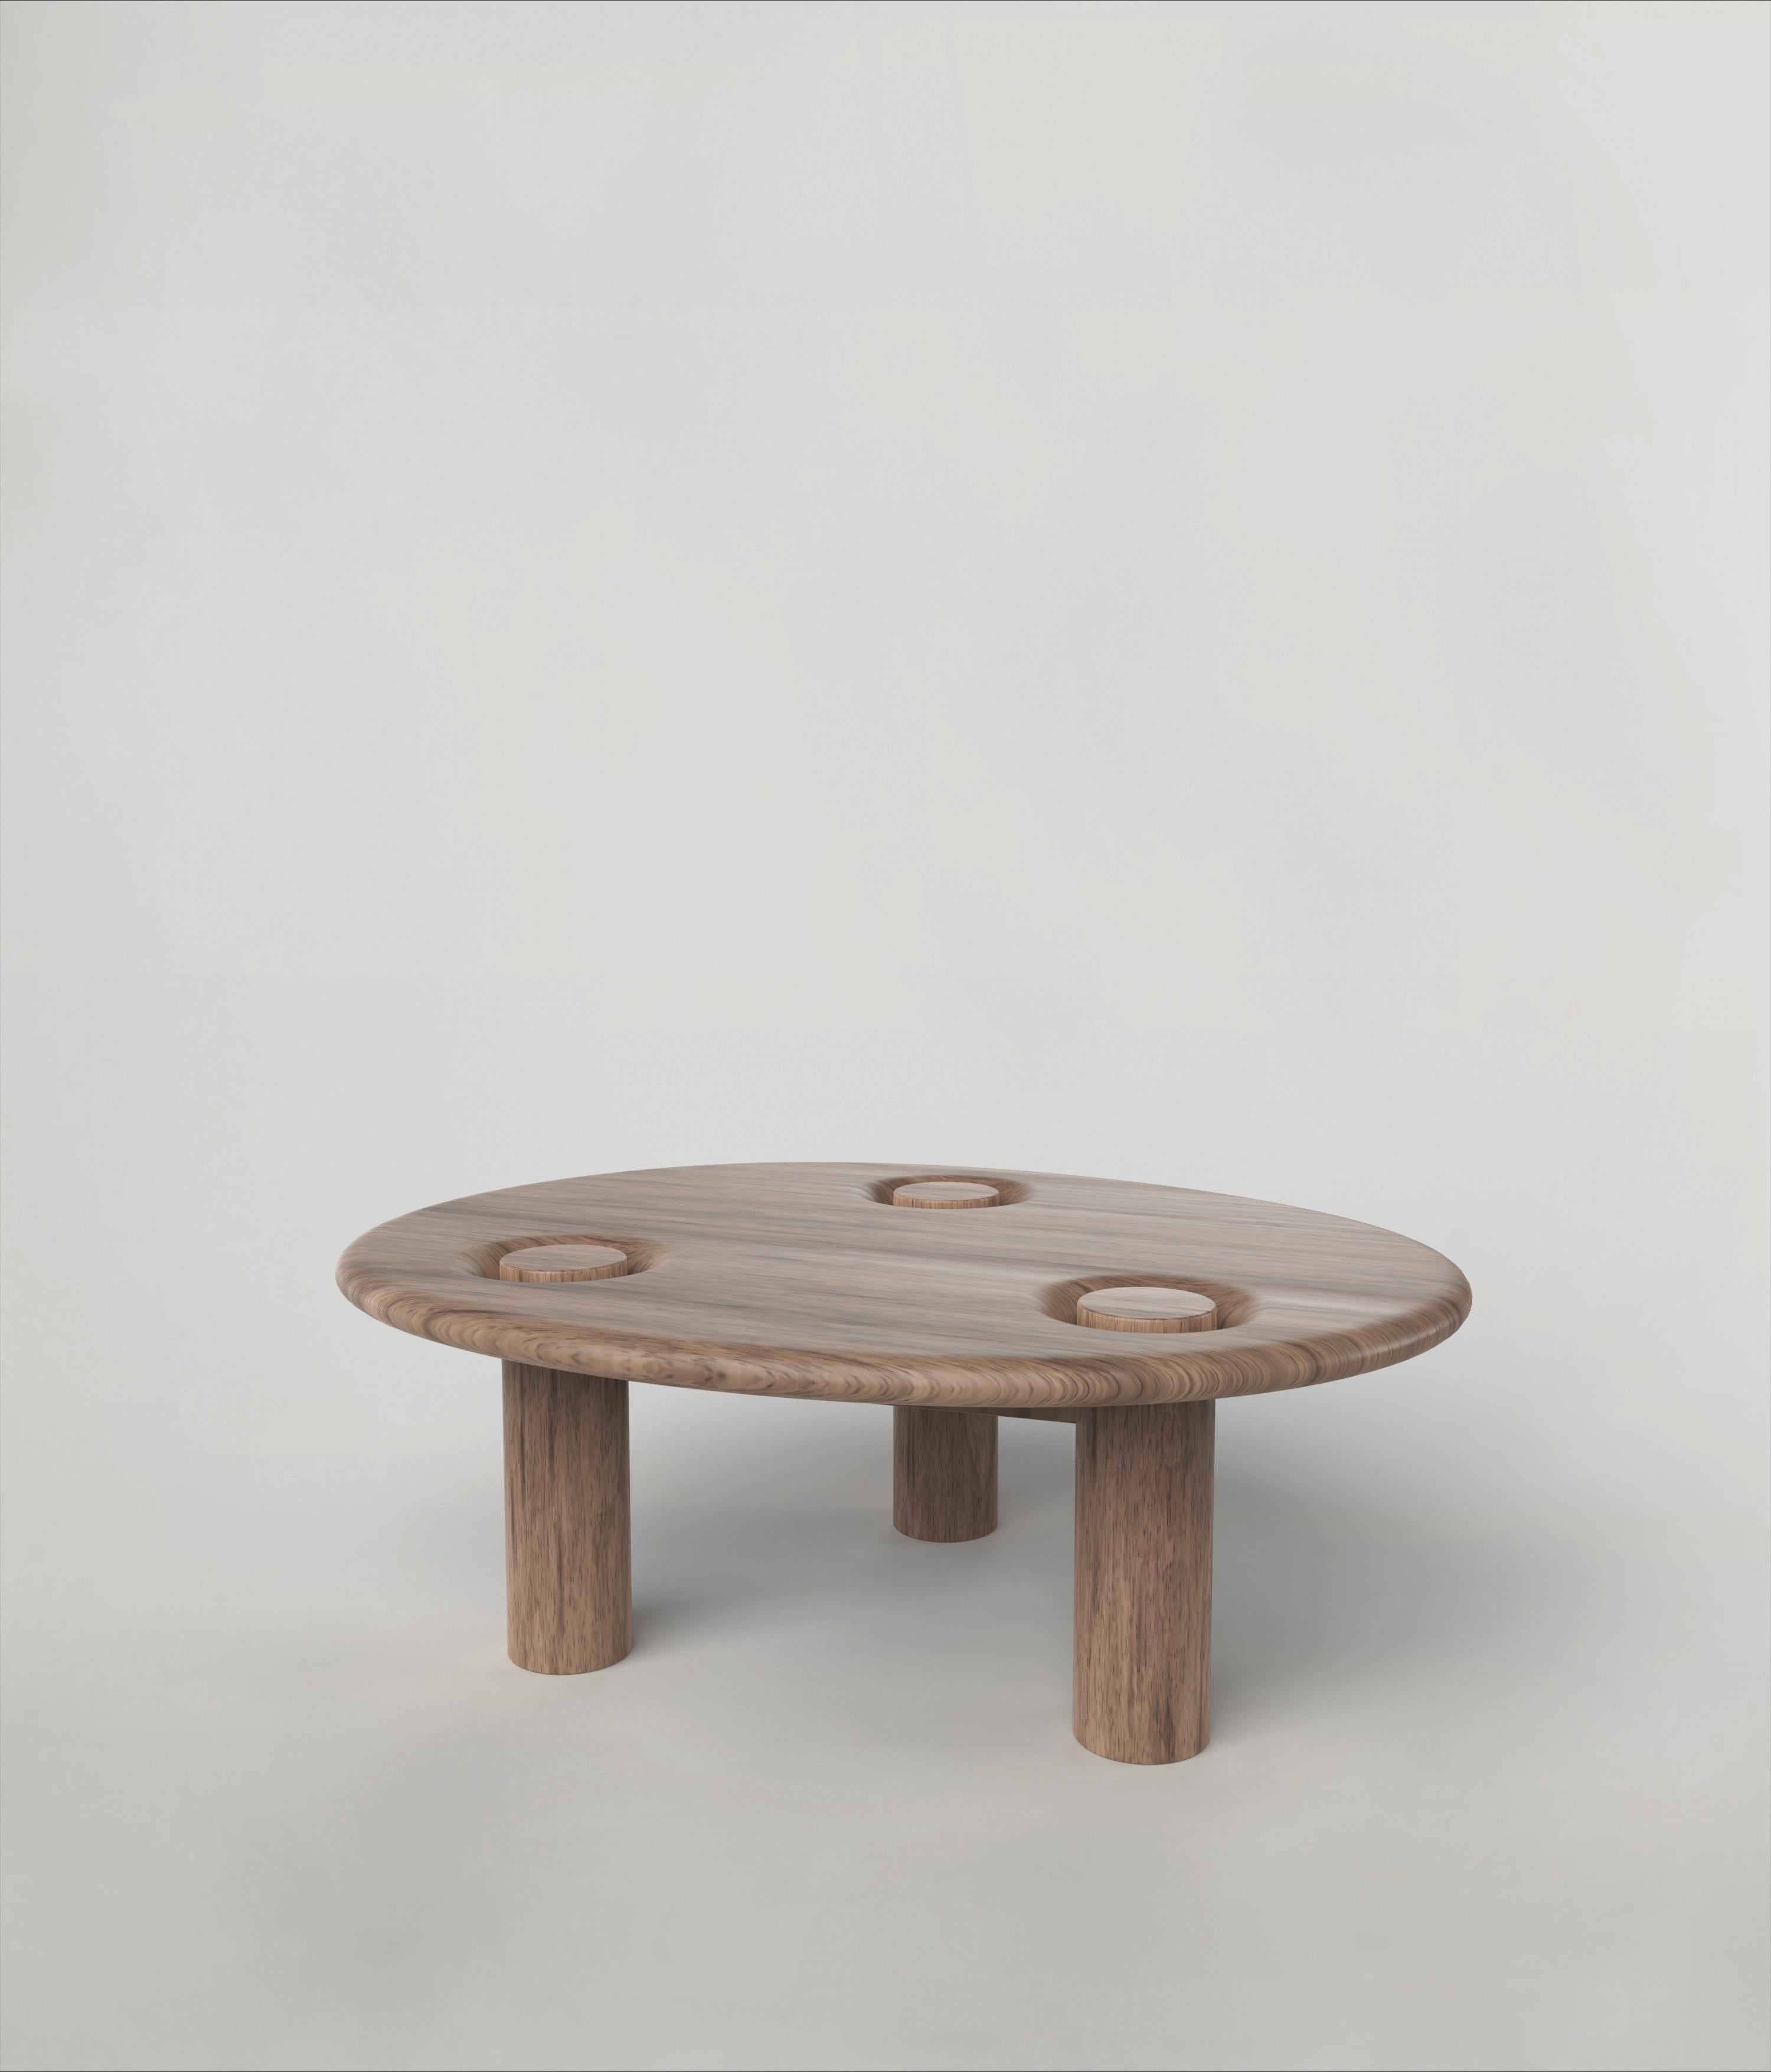 Asido V1 represents the elegance of 21st Century Italian manufacturing, the experience and savoir faire of our woodworkers. The piece is manufactured in a limited edition of 150 signed and progressively numbered examples. It is part of the